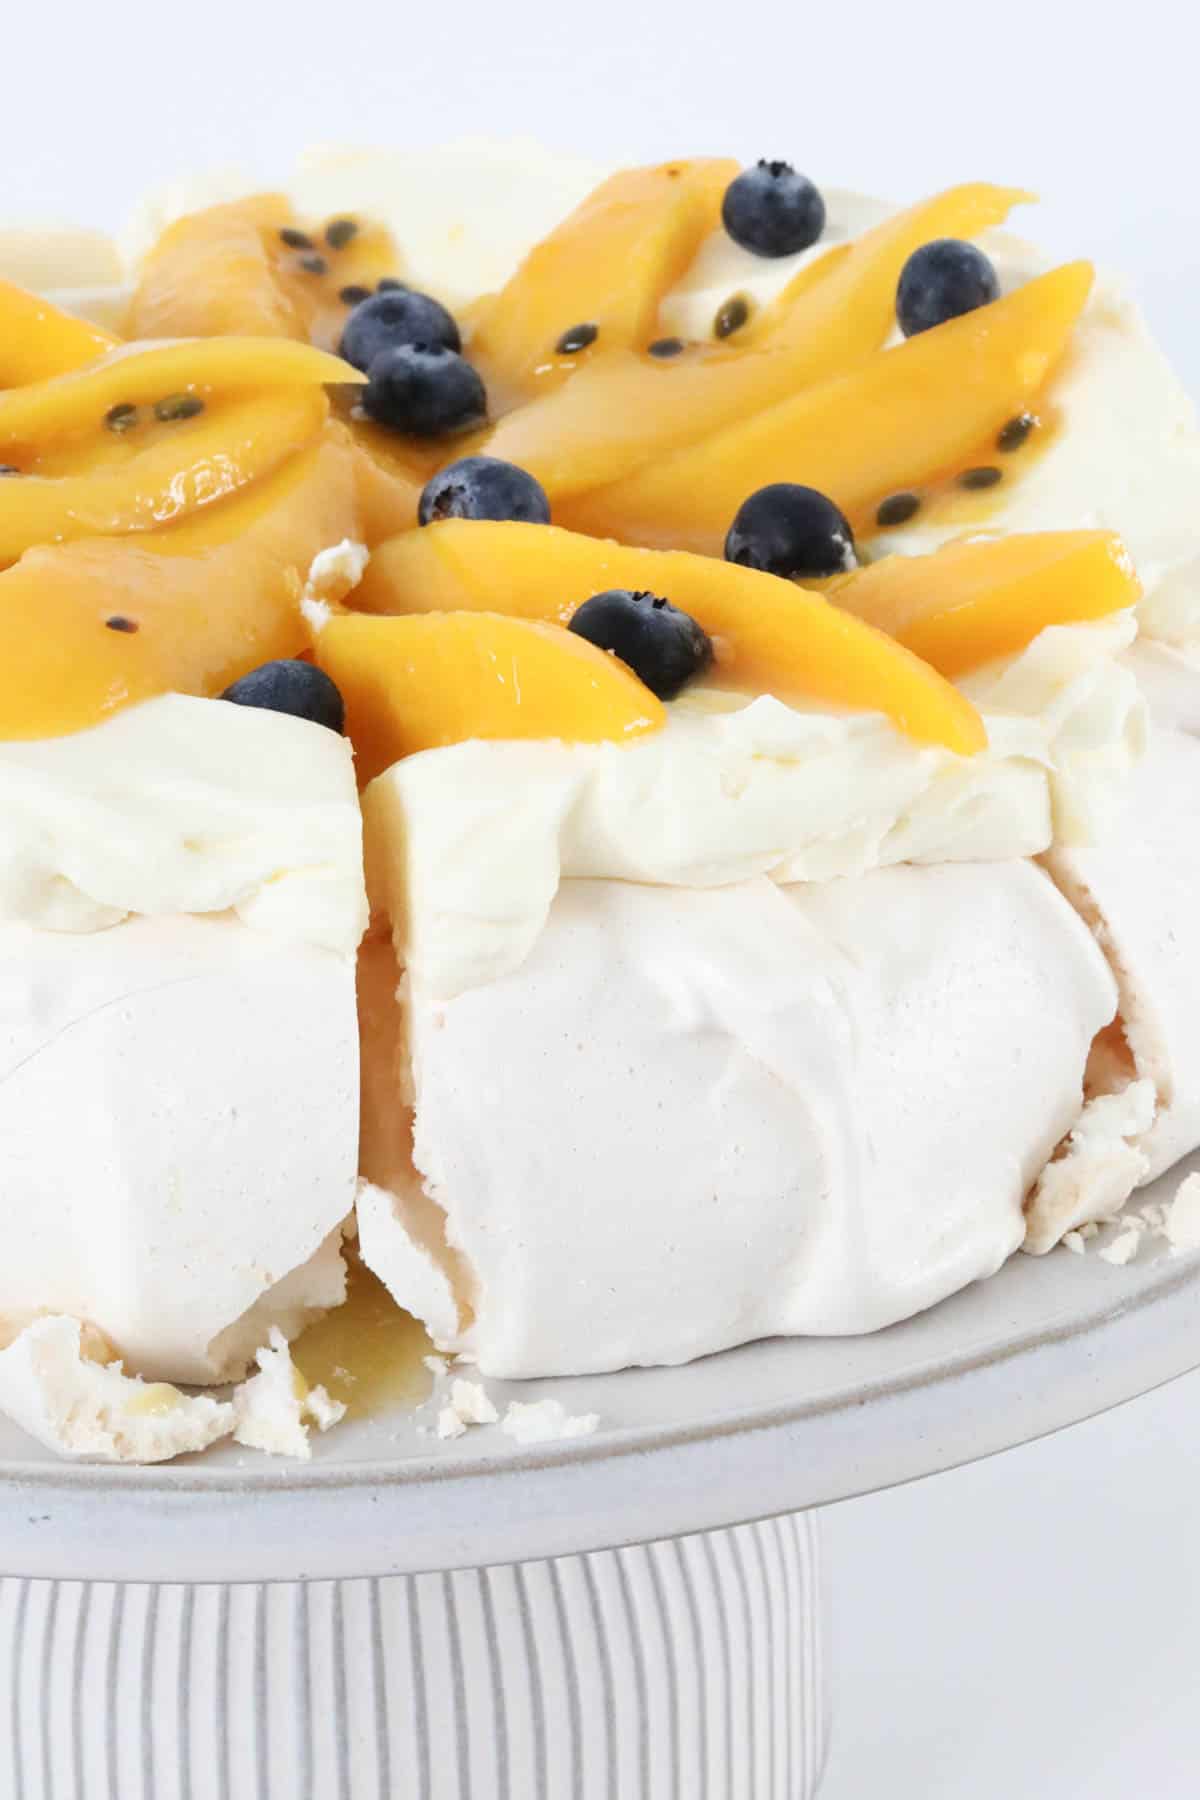 Passionfruit and mango pavlova on a cake stand with a slice cut ready to serve.